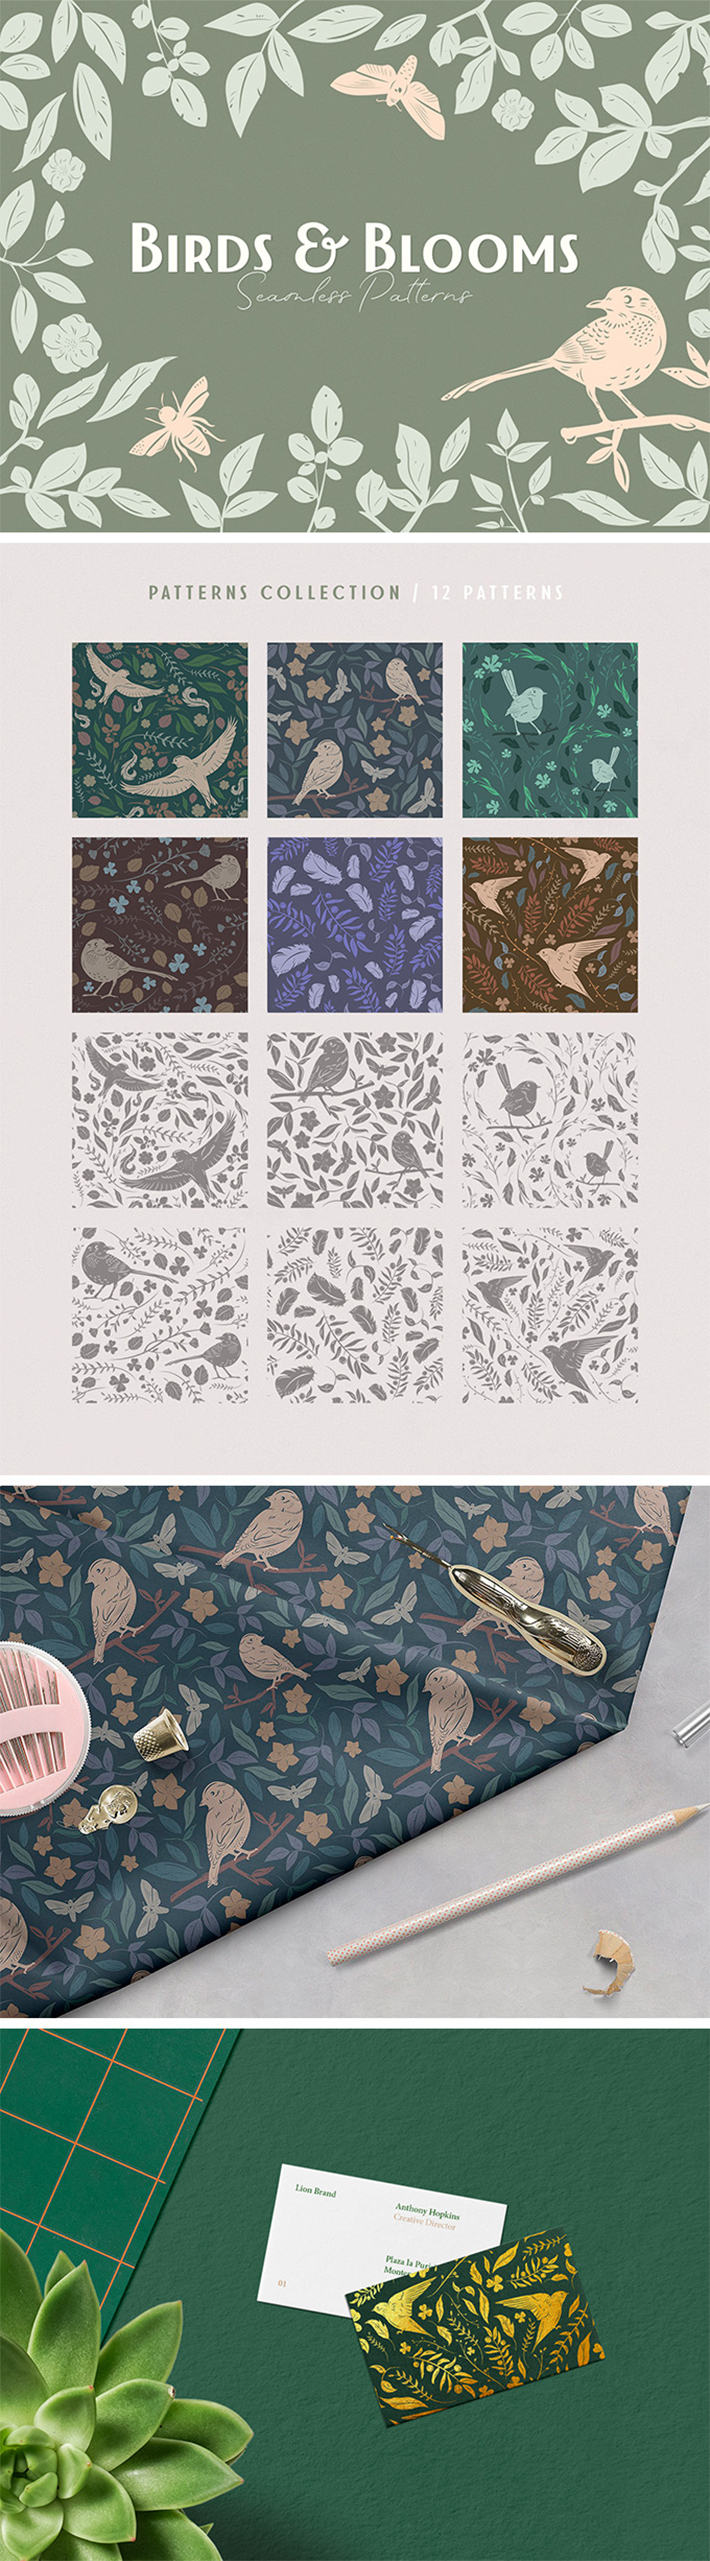 Free Download 12 Awesome Birds & Blooms Seamless Patterns For Designers